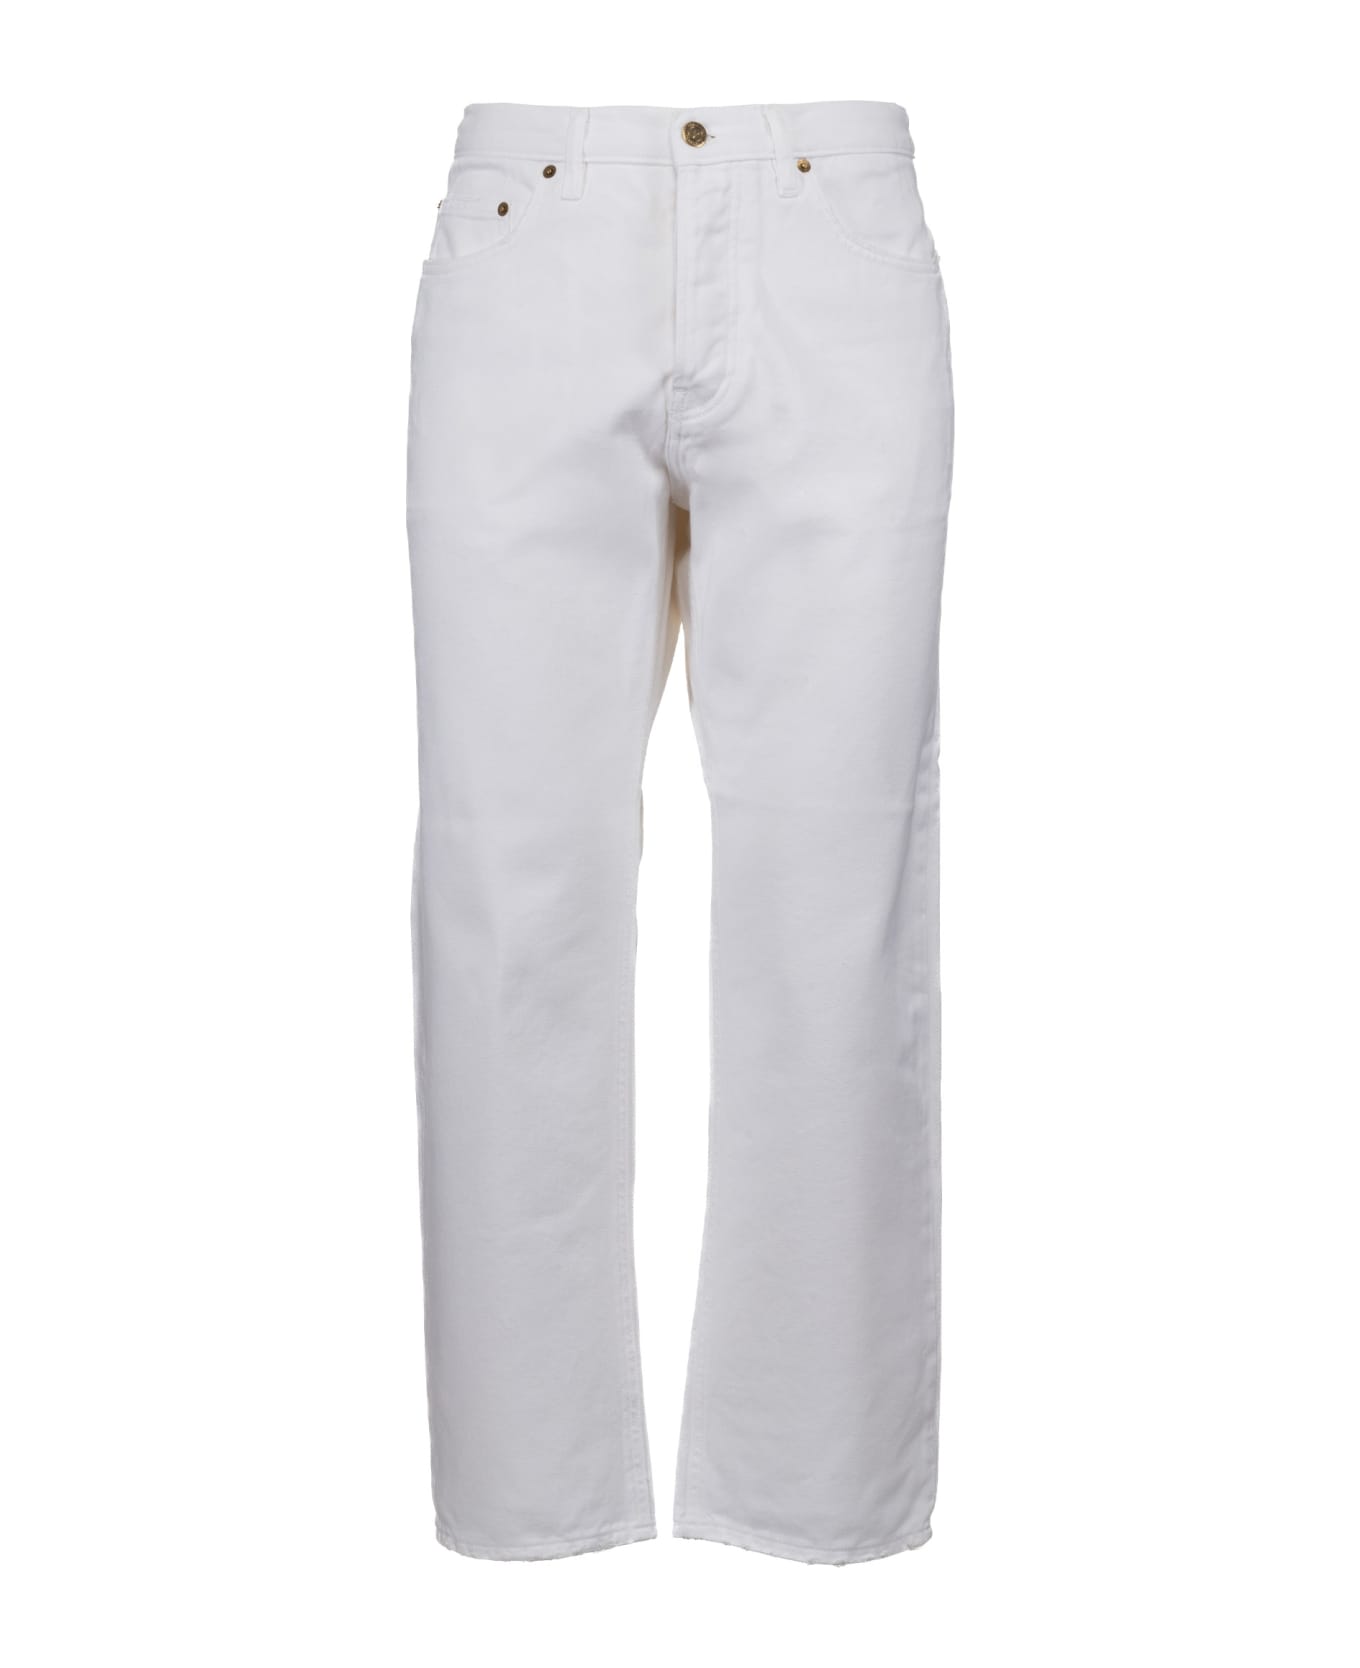 Golden Goose Cory Jeans - Bianco